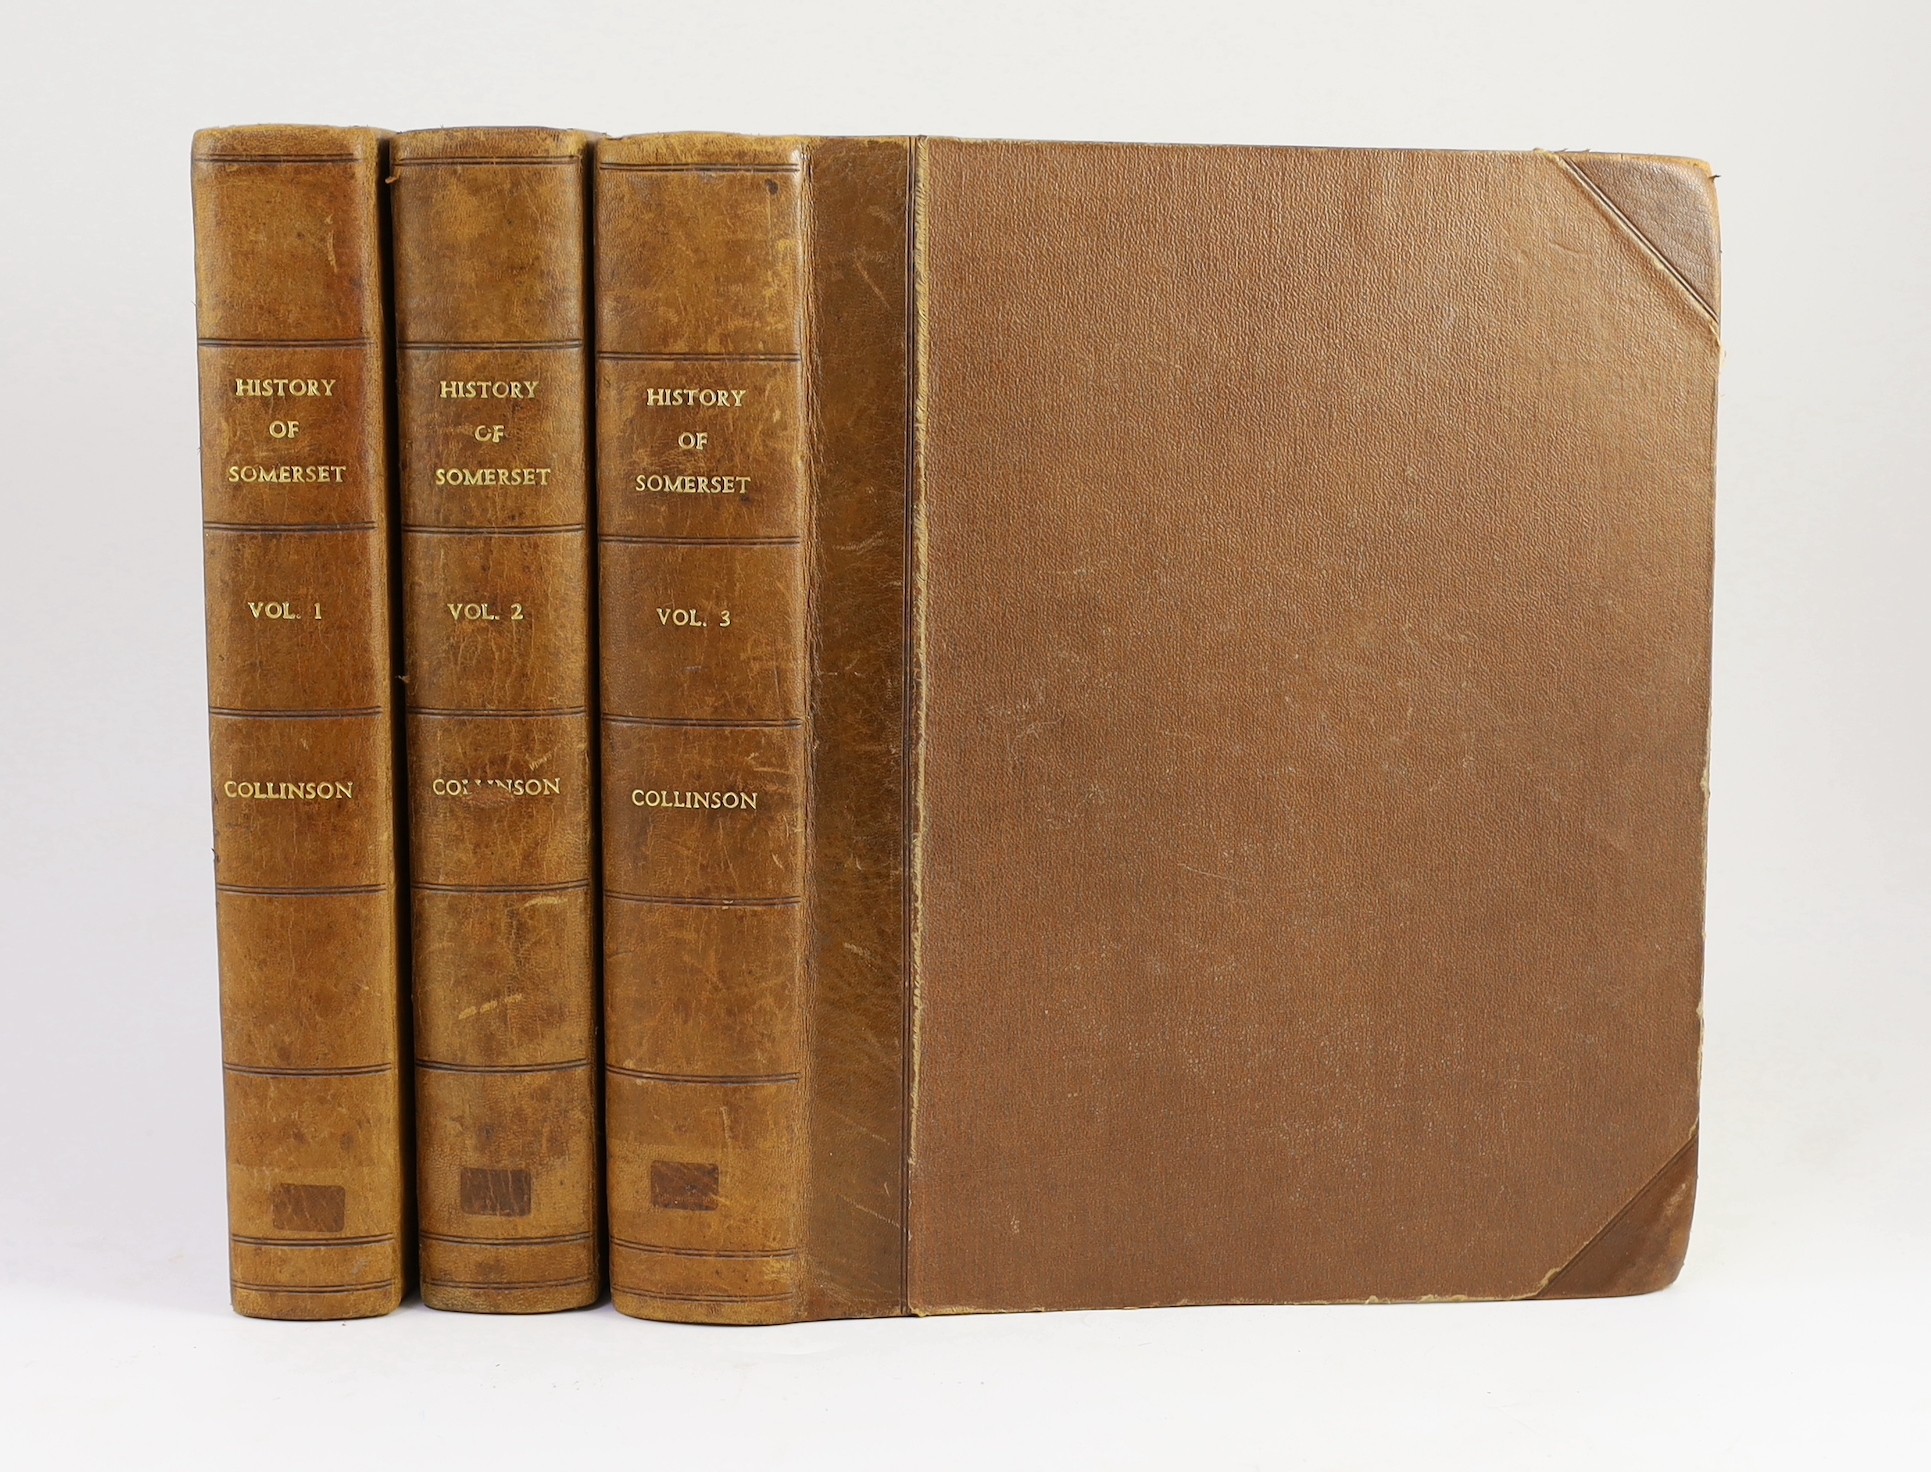 SOMERSET: Collinson, Rev. John - The History and Antiquities of the County of Somerset, collected from Authentick Records, and an Actual Survey made by the late Mr. Edmund Rack.... 3 vols. folded map, pictorial plan of B